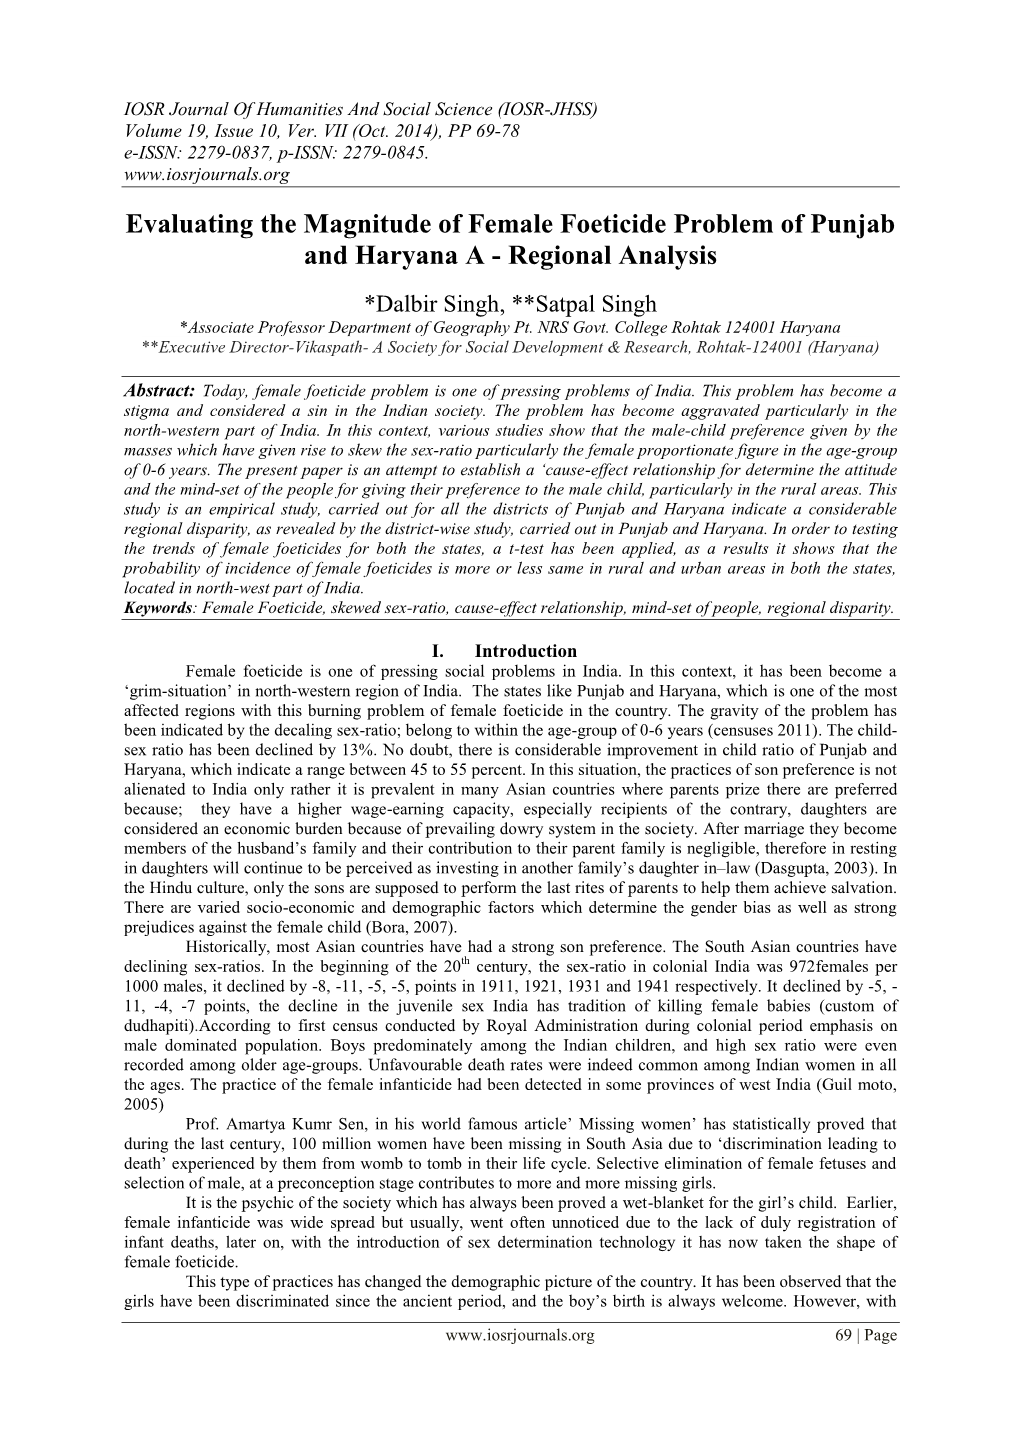 Evaluating the Magnitude of Female Foeticide Problem of Punjab and Haryana a - Regional Analysis